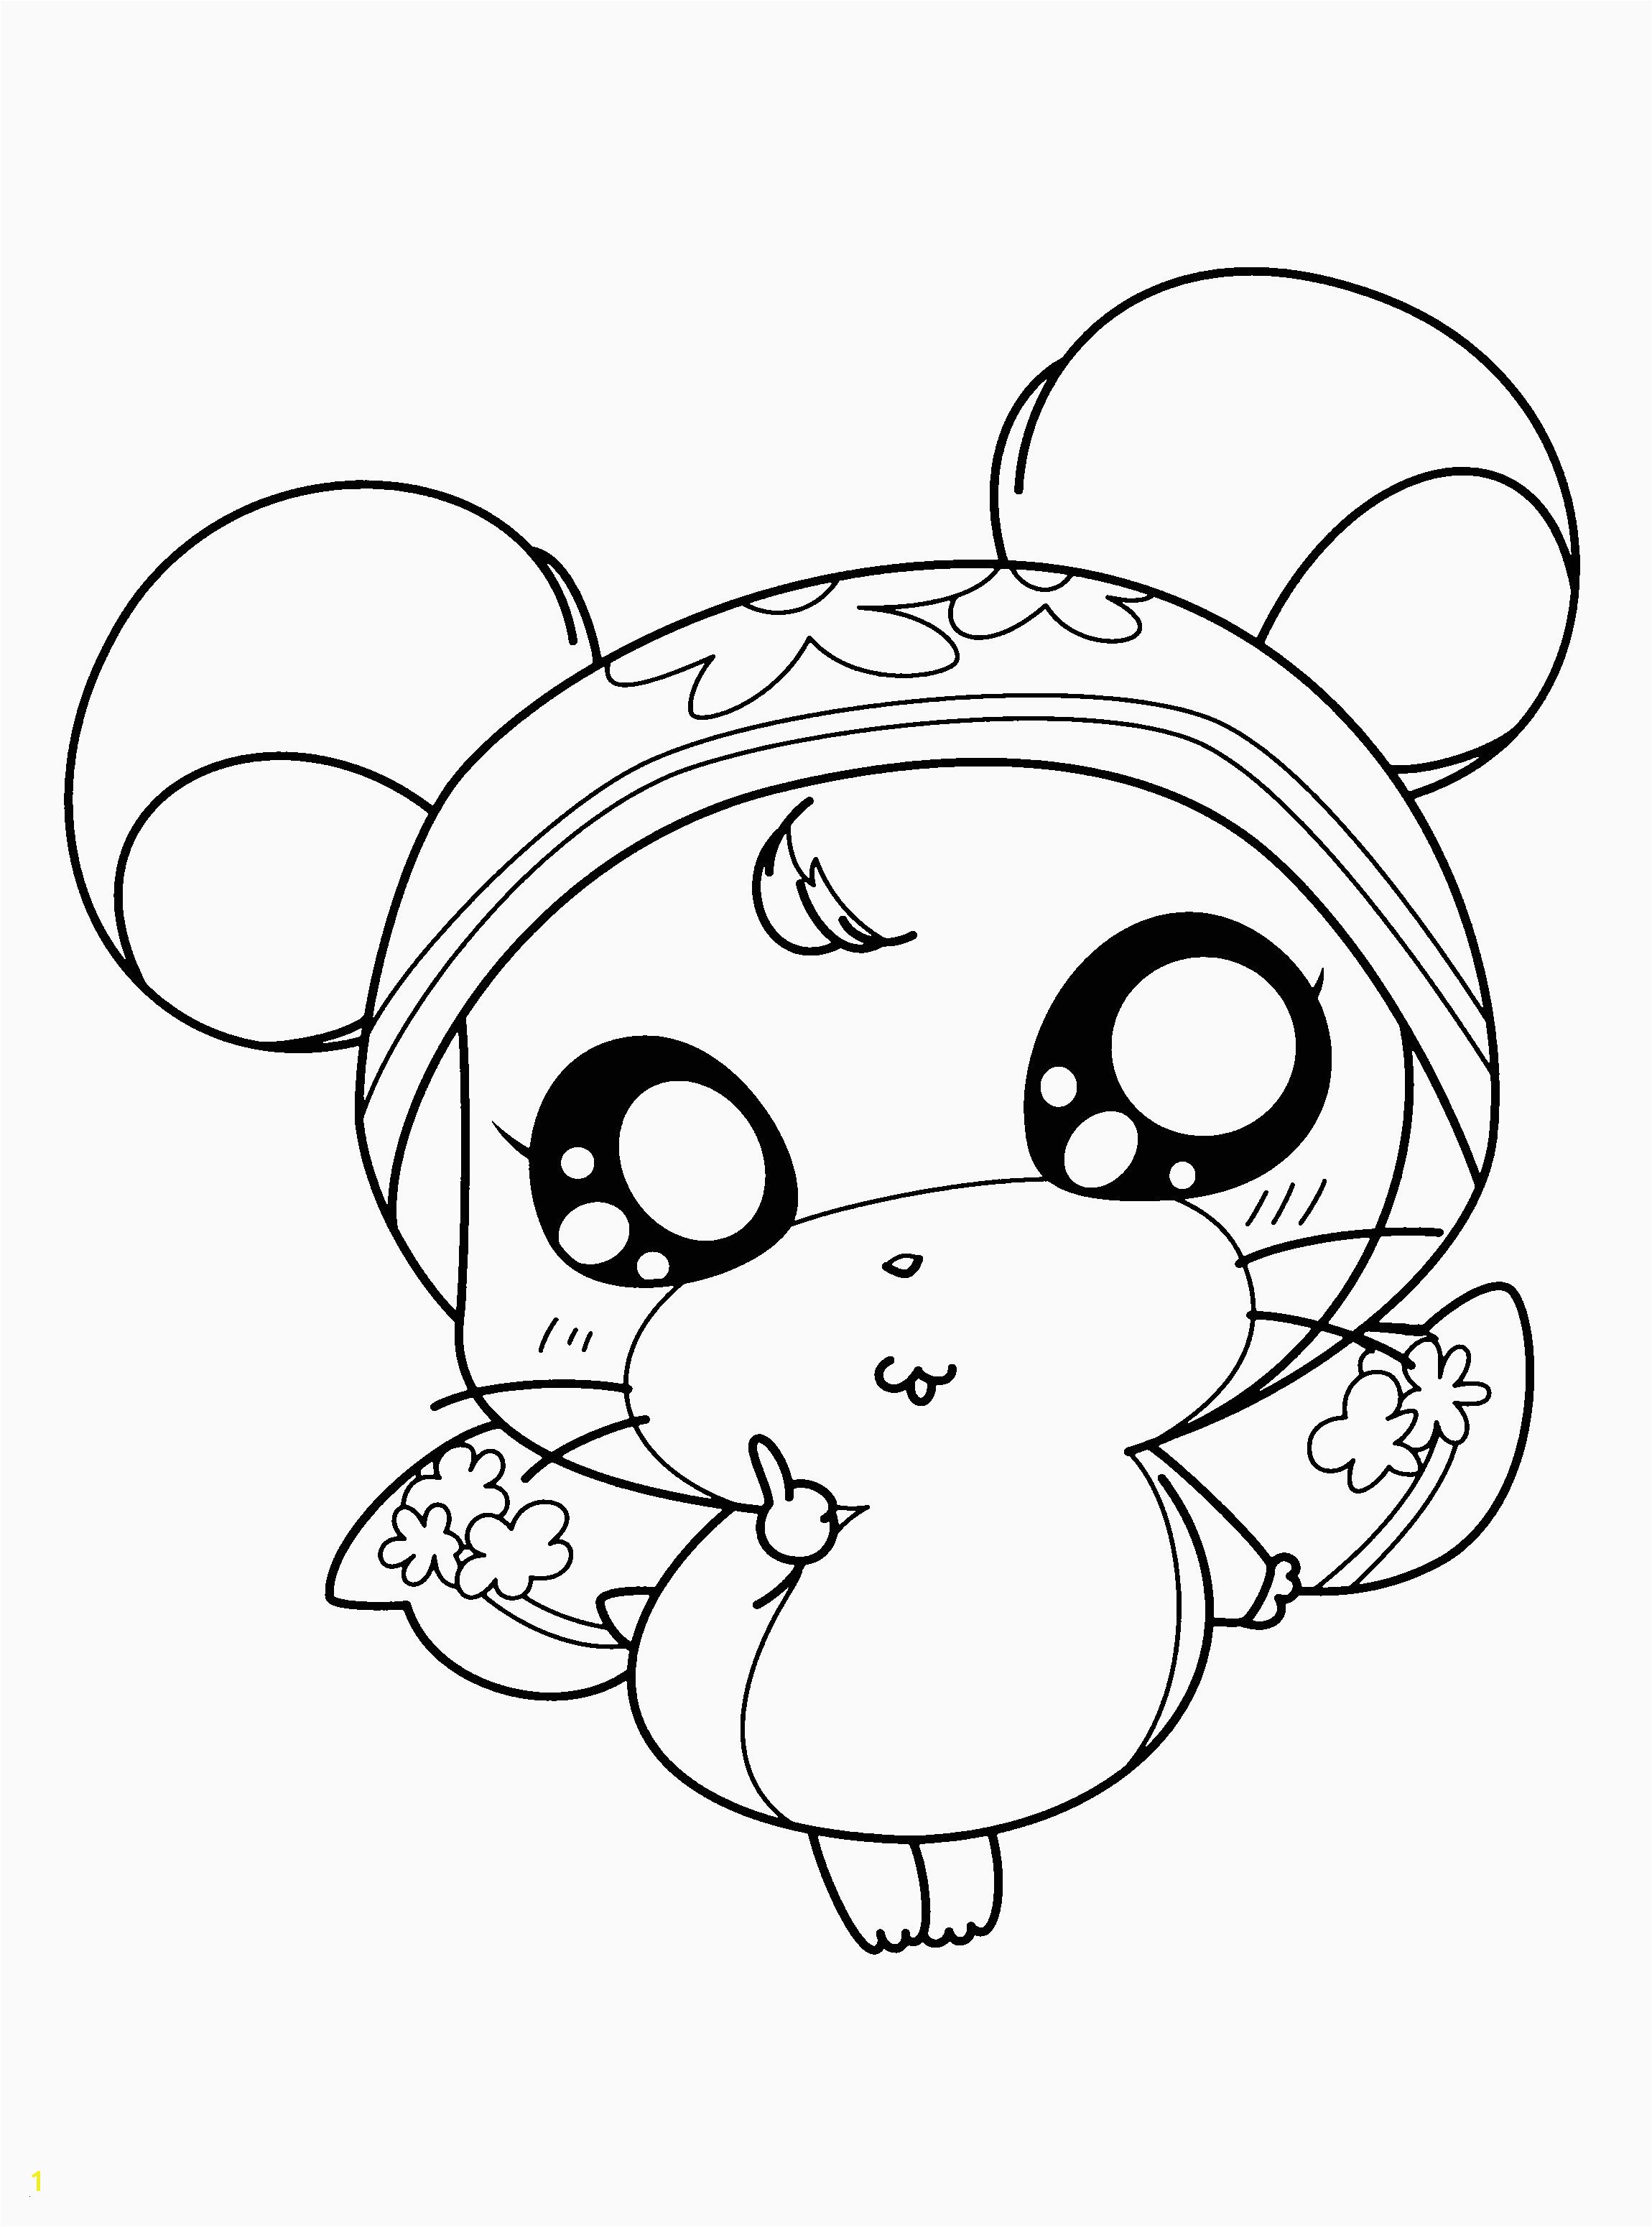 Cute Baby Animal Coloring Pages 30 Fresh Baby Animal Coloring Pages Alabamashrimpfestival